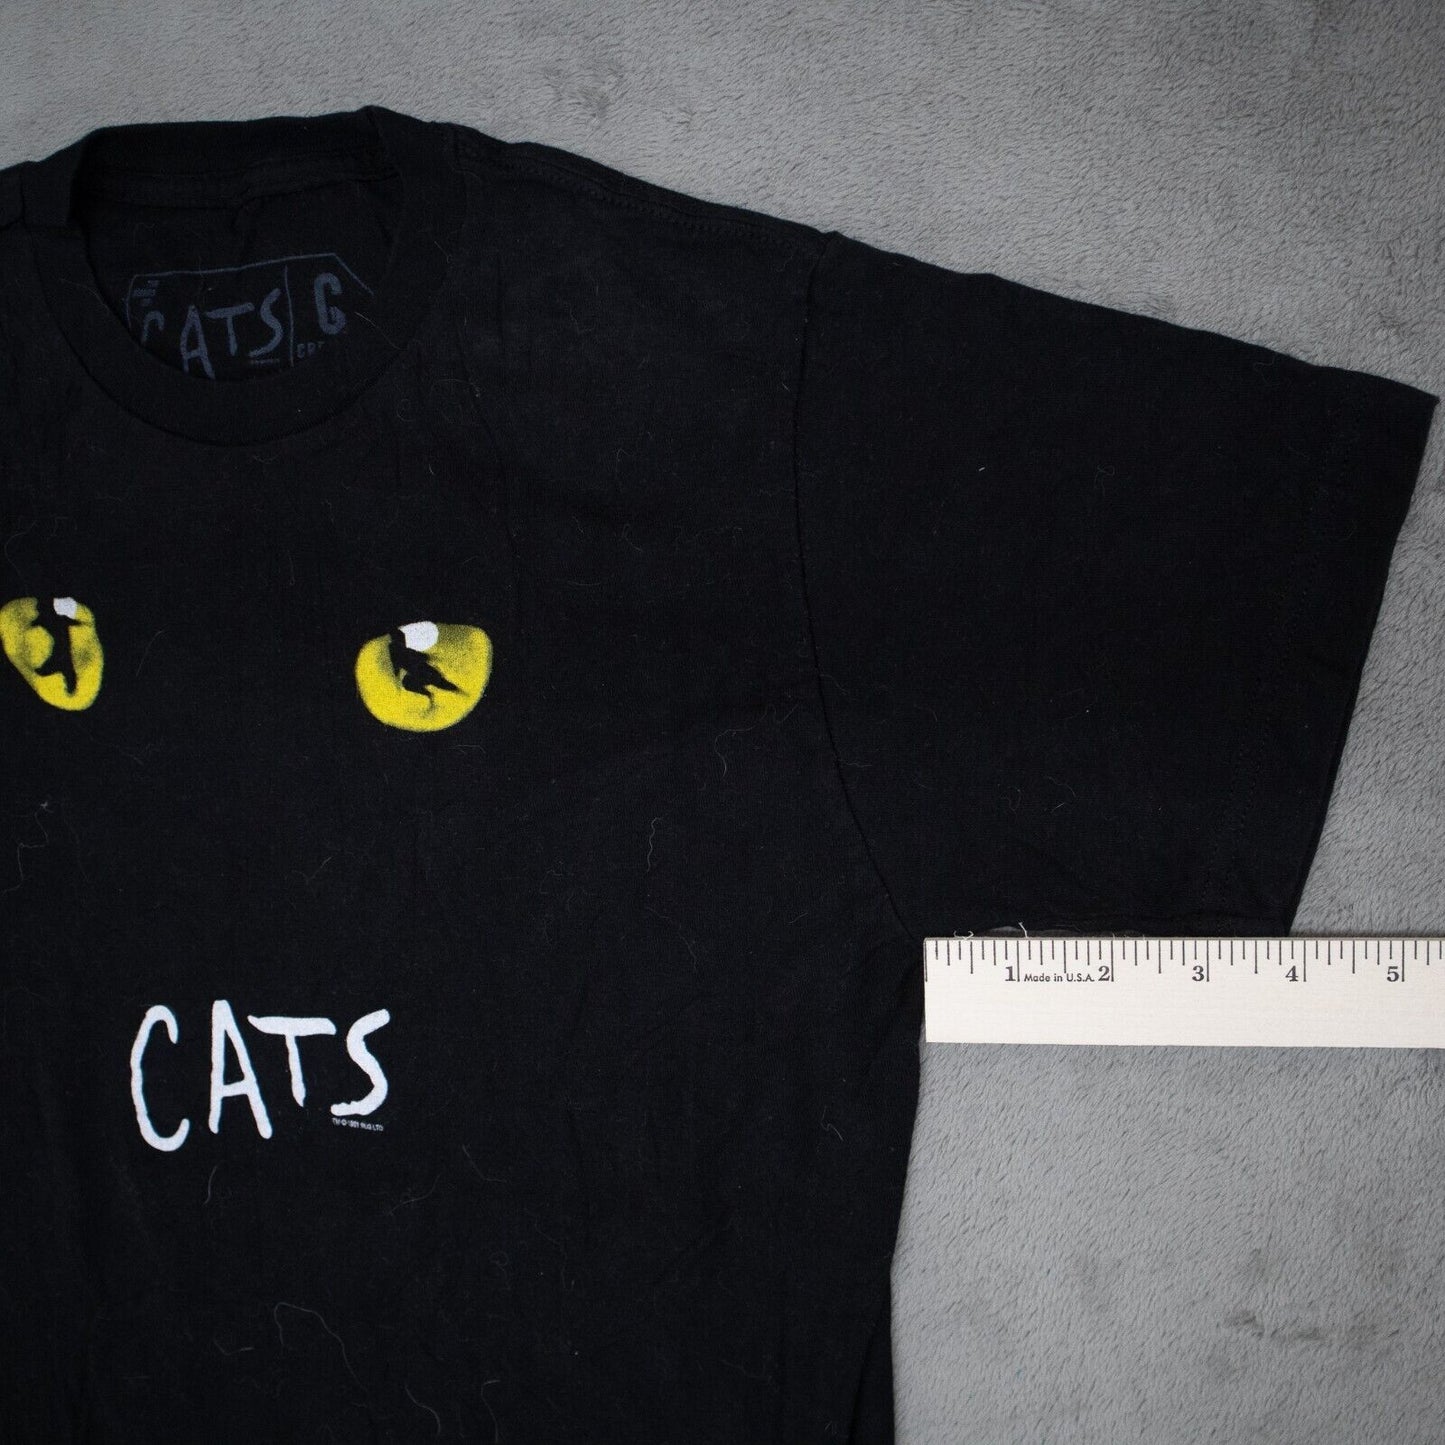 Cats Men's Graphics Cats Slim Fit T-Shirt Short Sleeves Solid Black Size Small